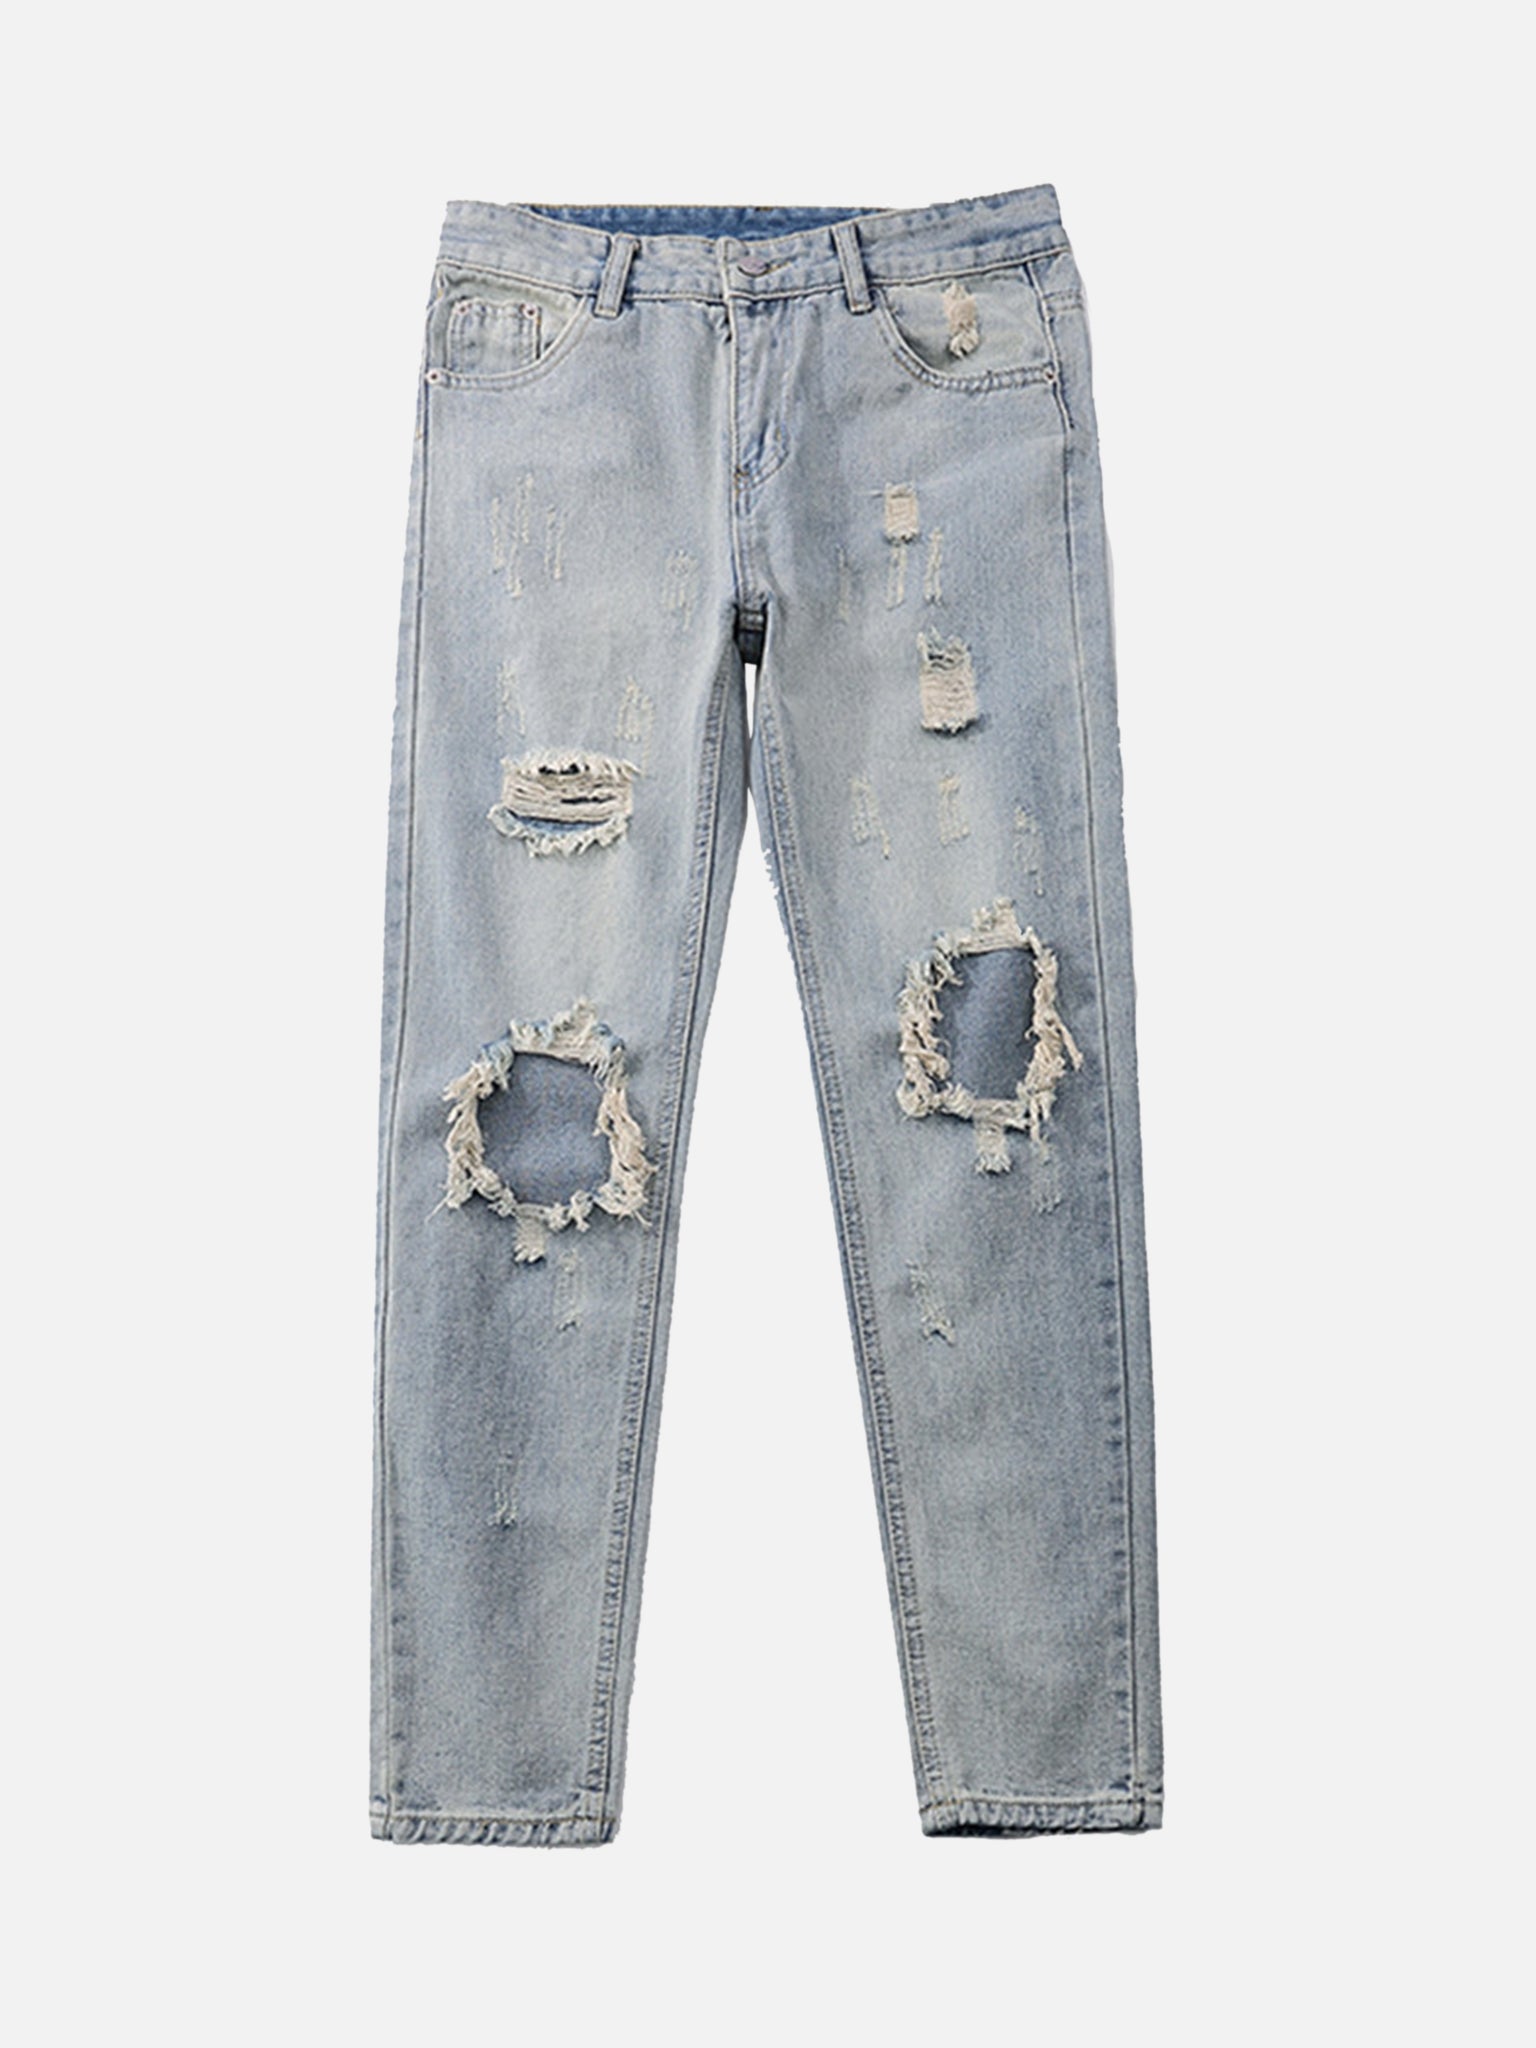 The Supermade Washed Heavily Ripped Jeans